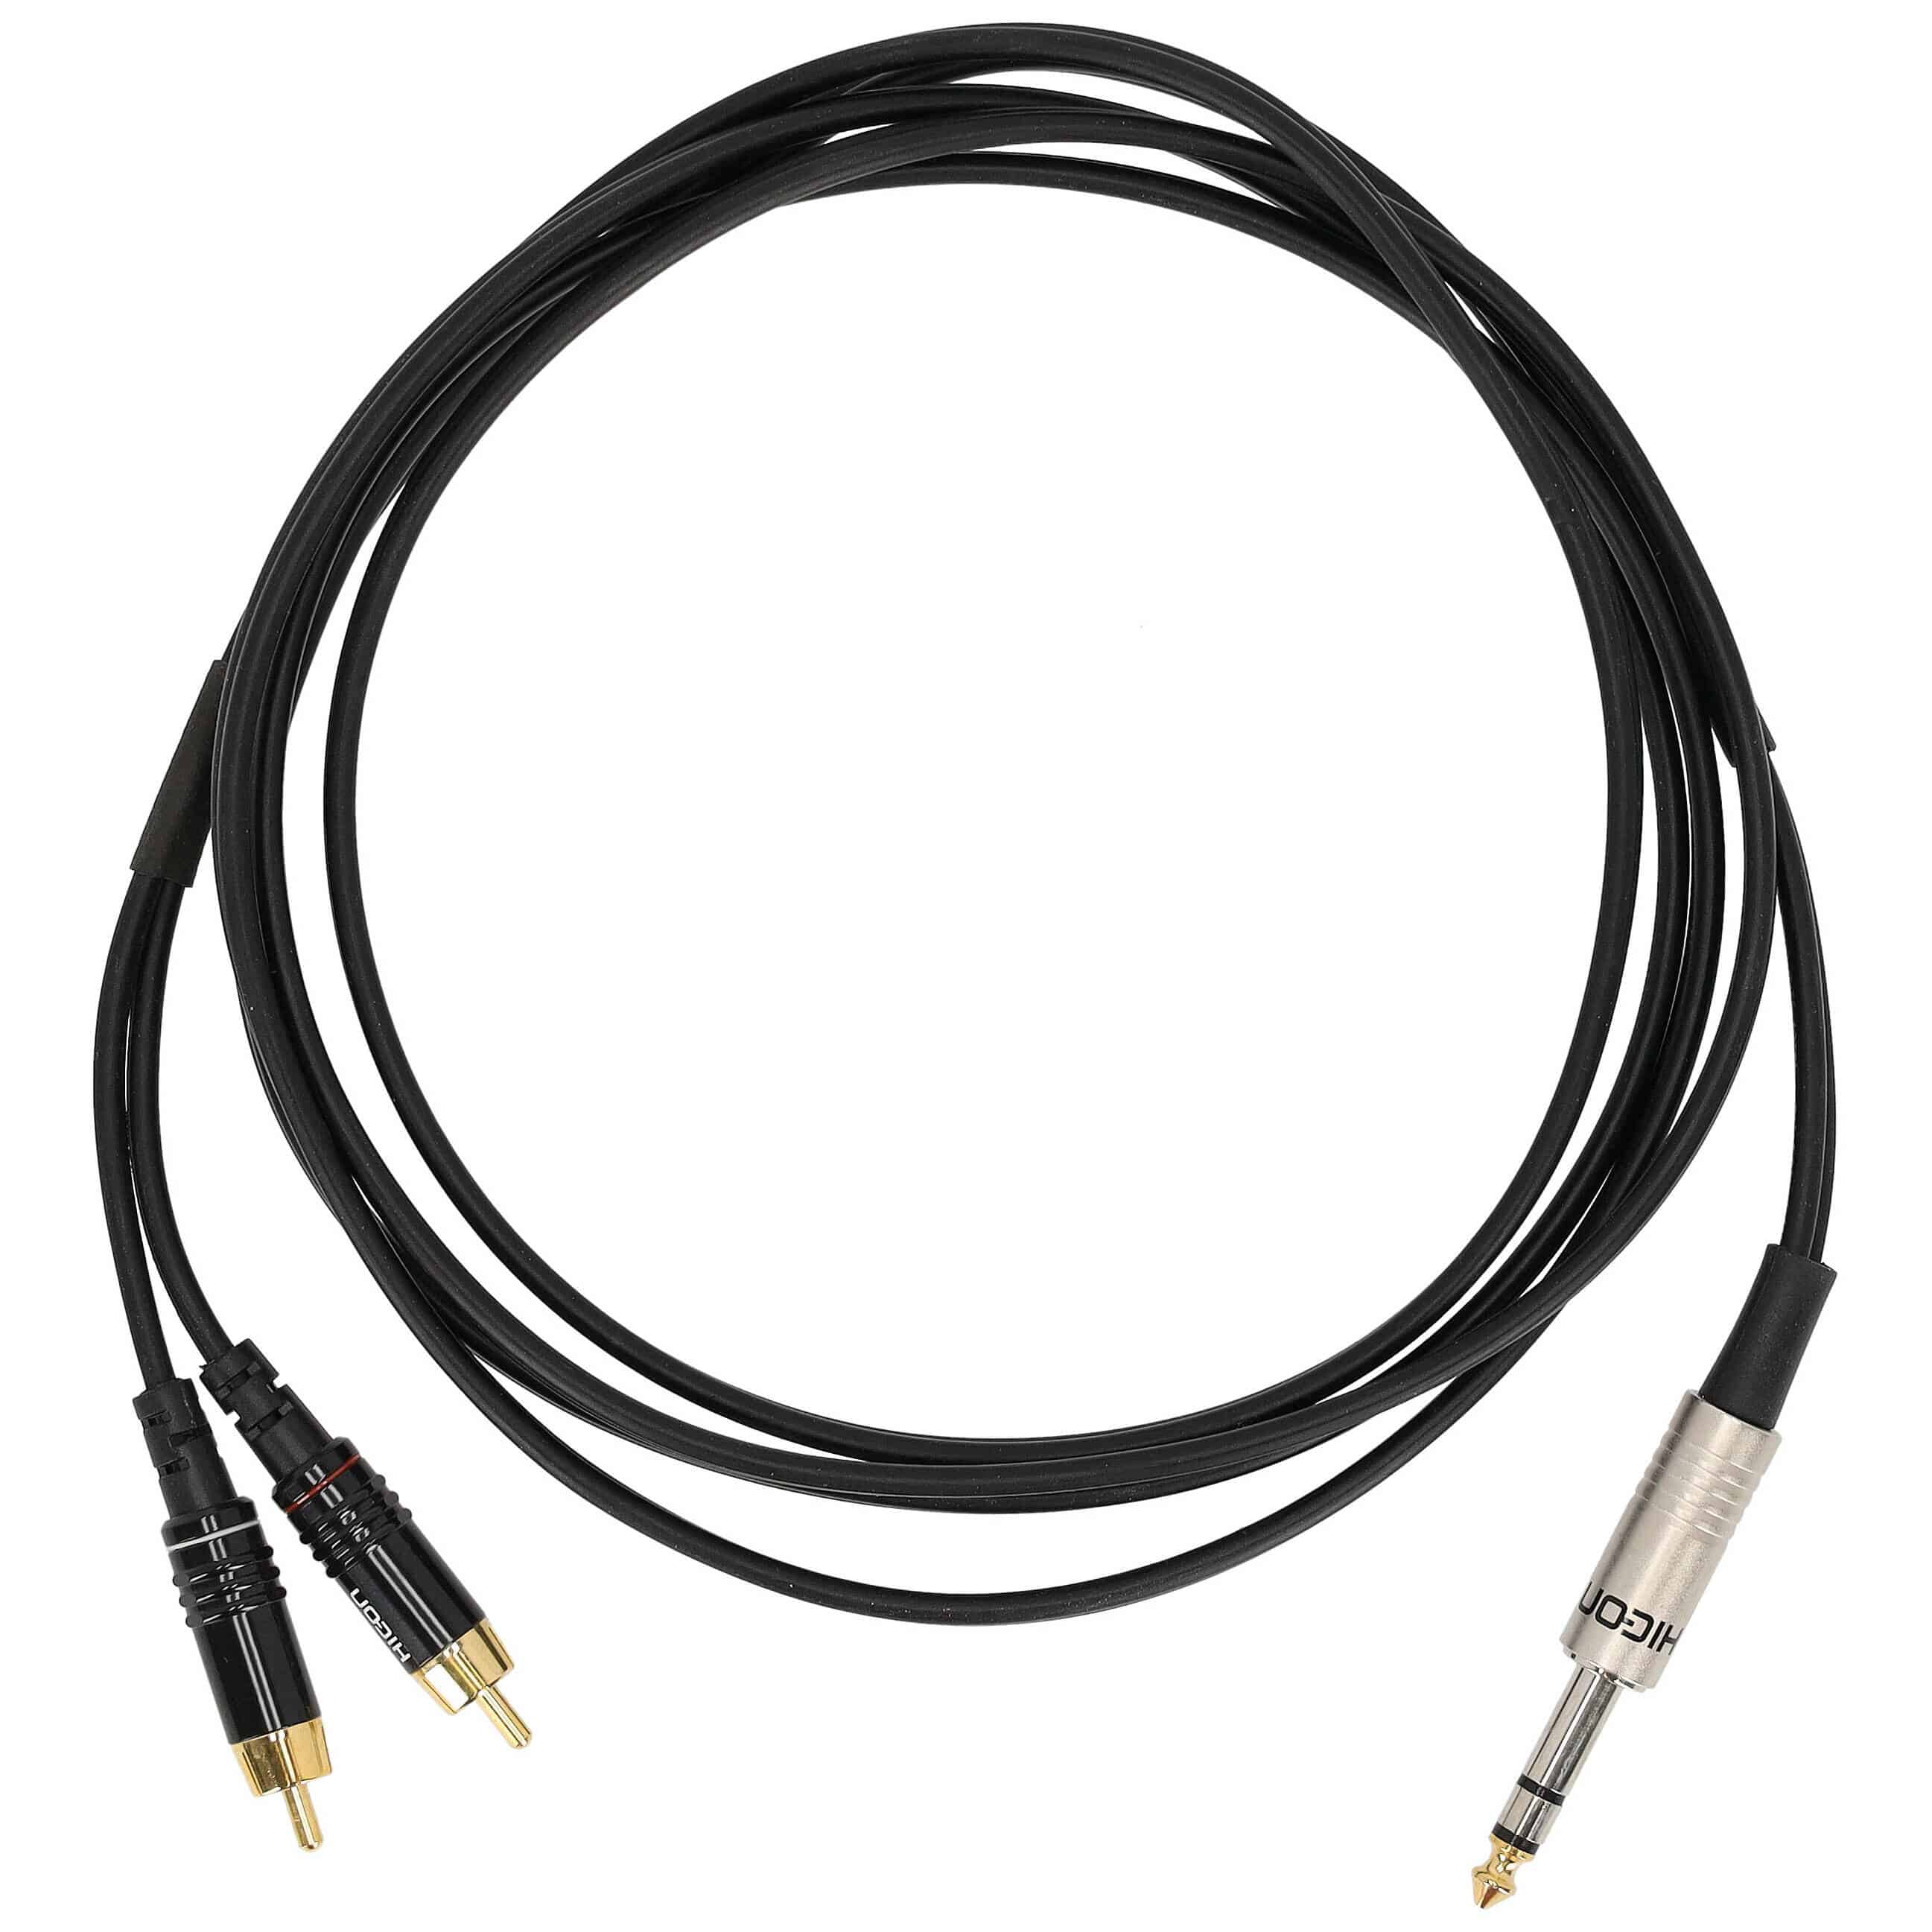 Sommer Cable ON56-0250-SW SC-Onyx Klinke Stereo Male - 2 x Cinch Male 2,5 Meter